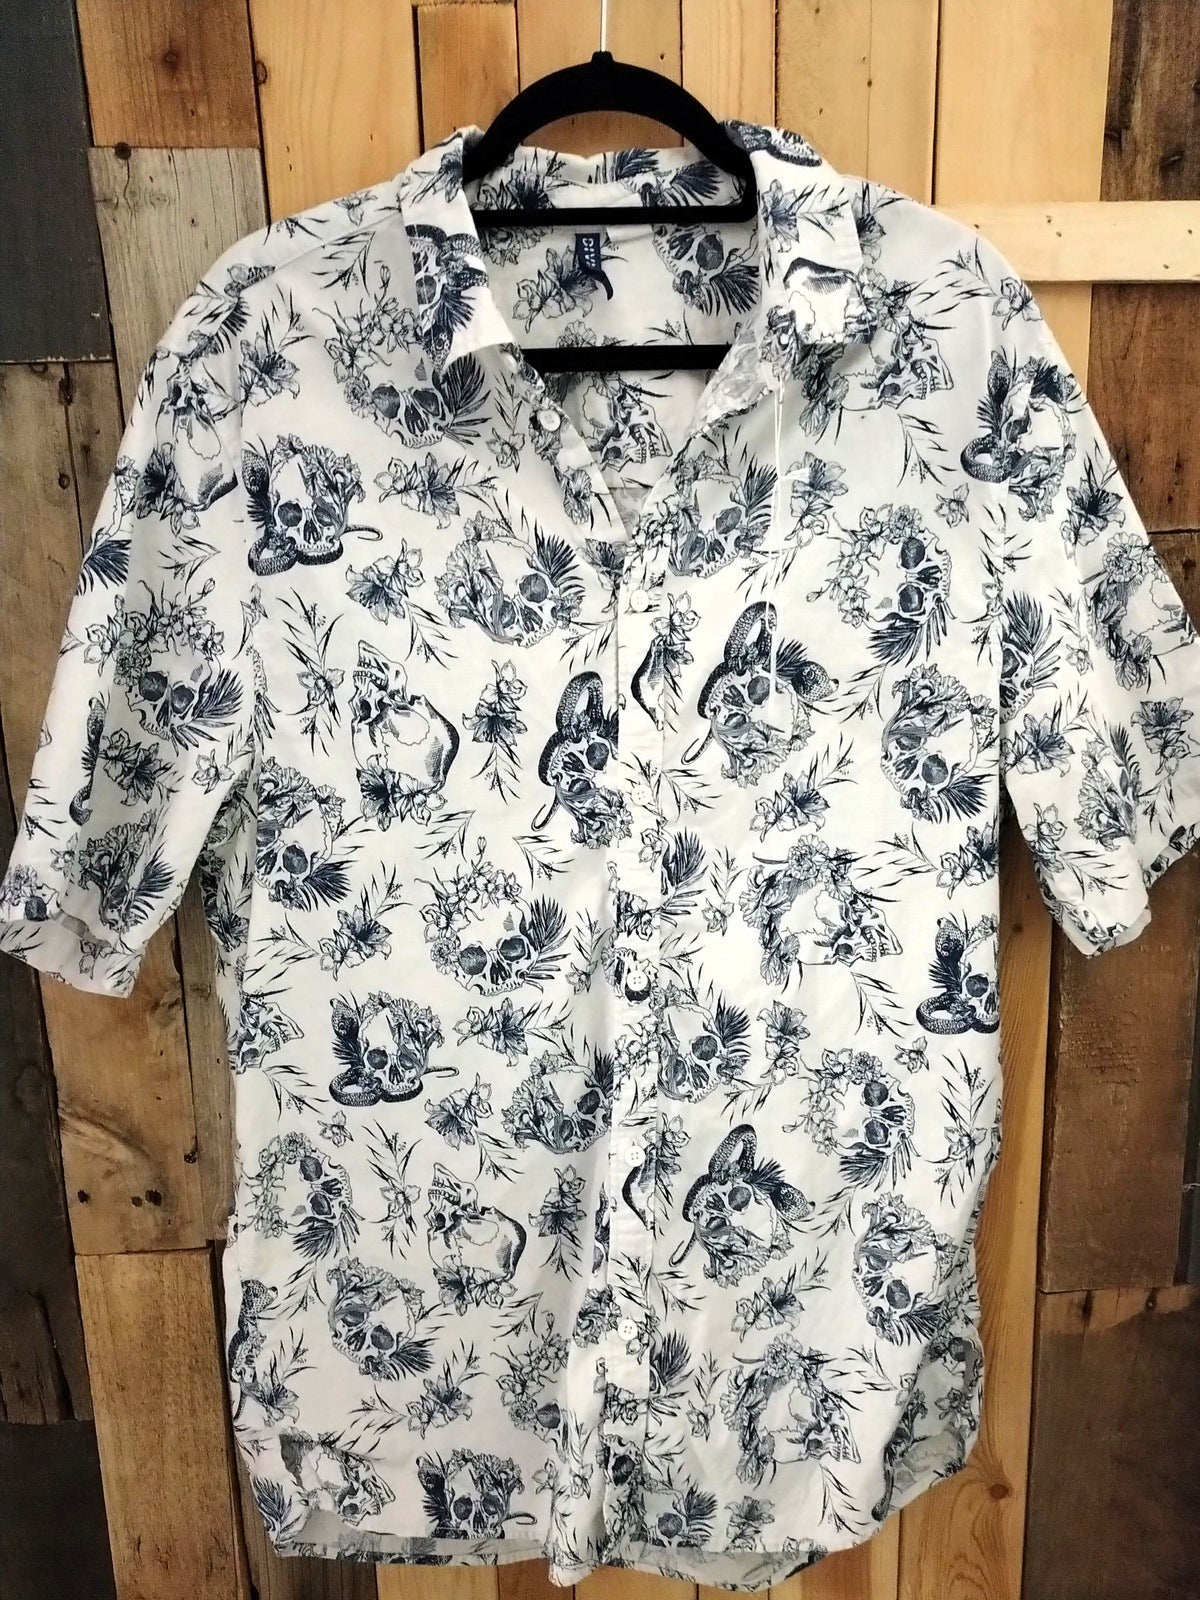 Divided Men's Short Sleeve Button Up Shirt Skulls, Snakes and Flowers Size XL